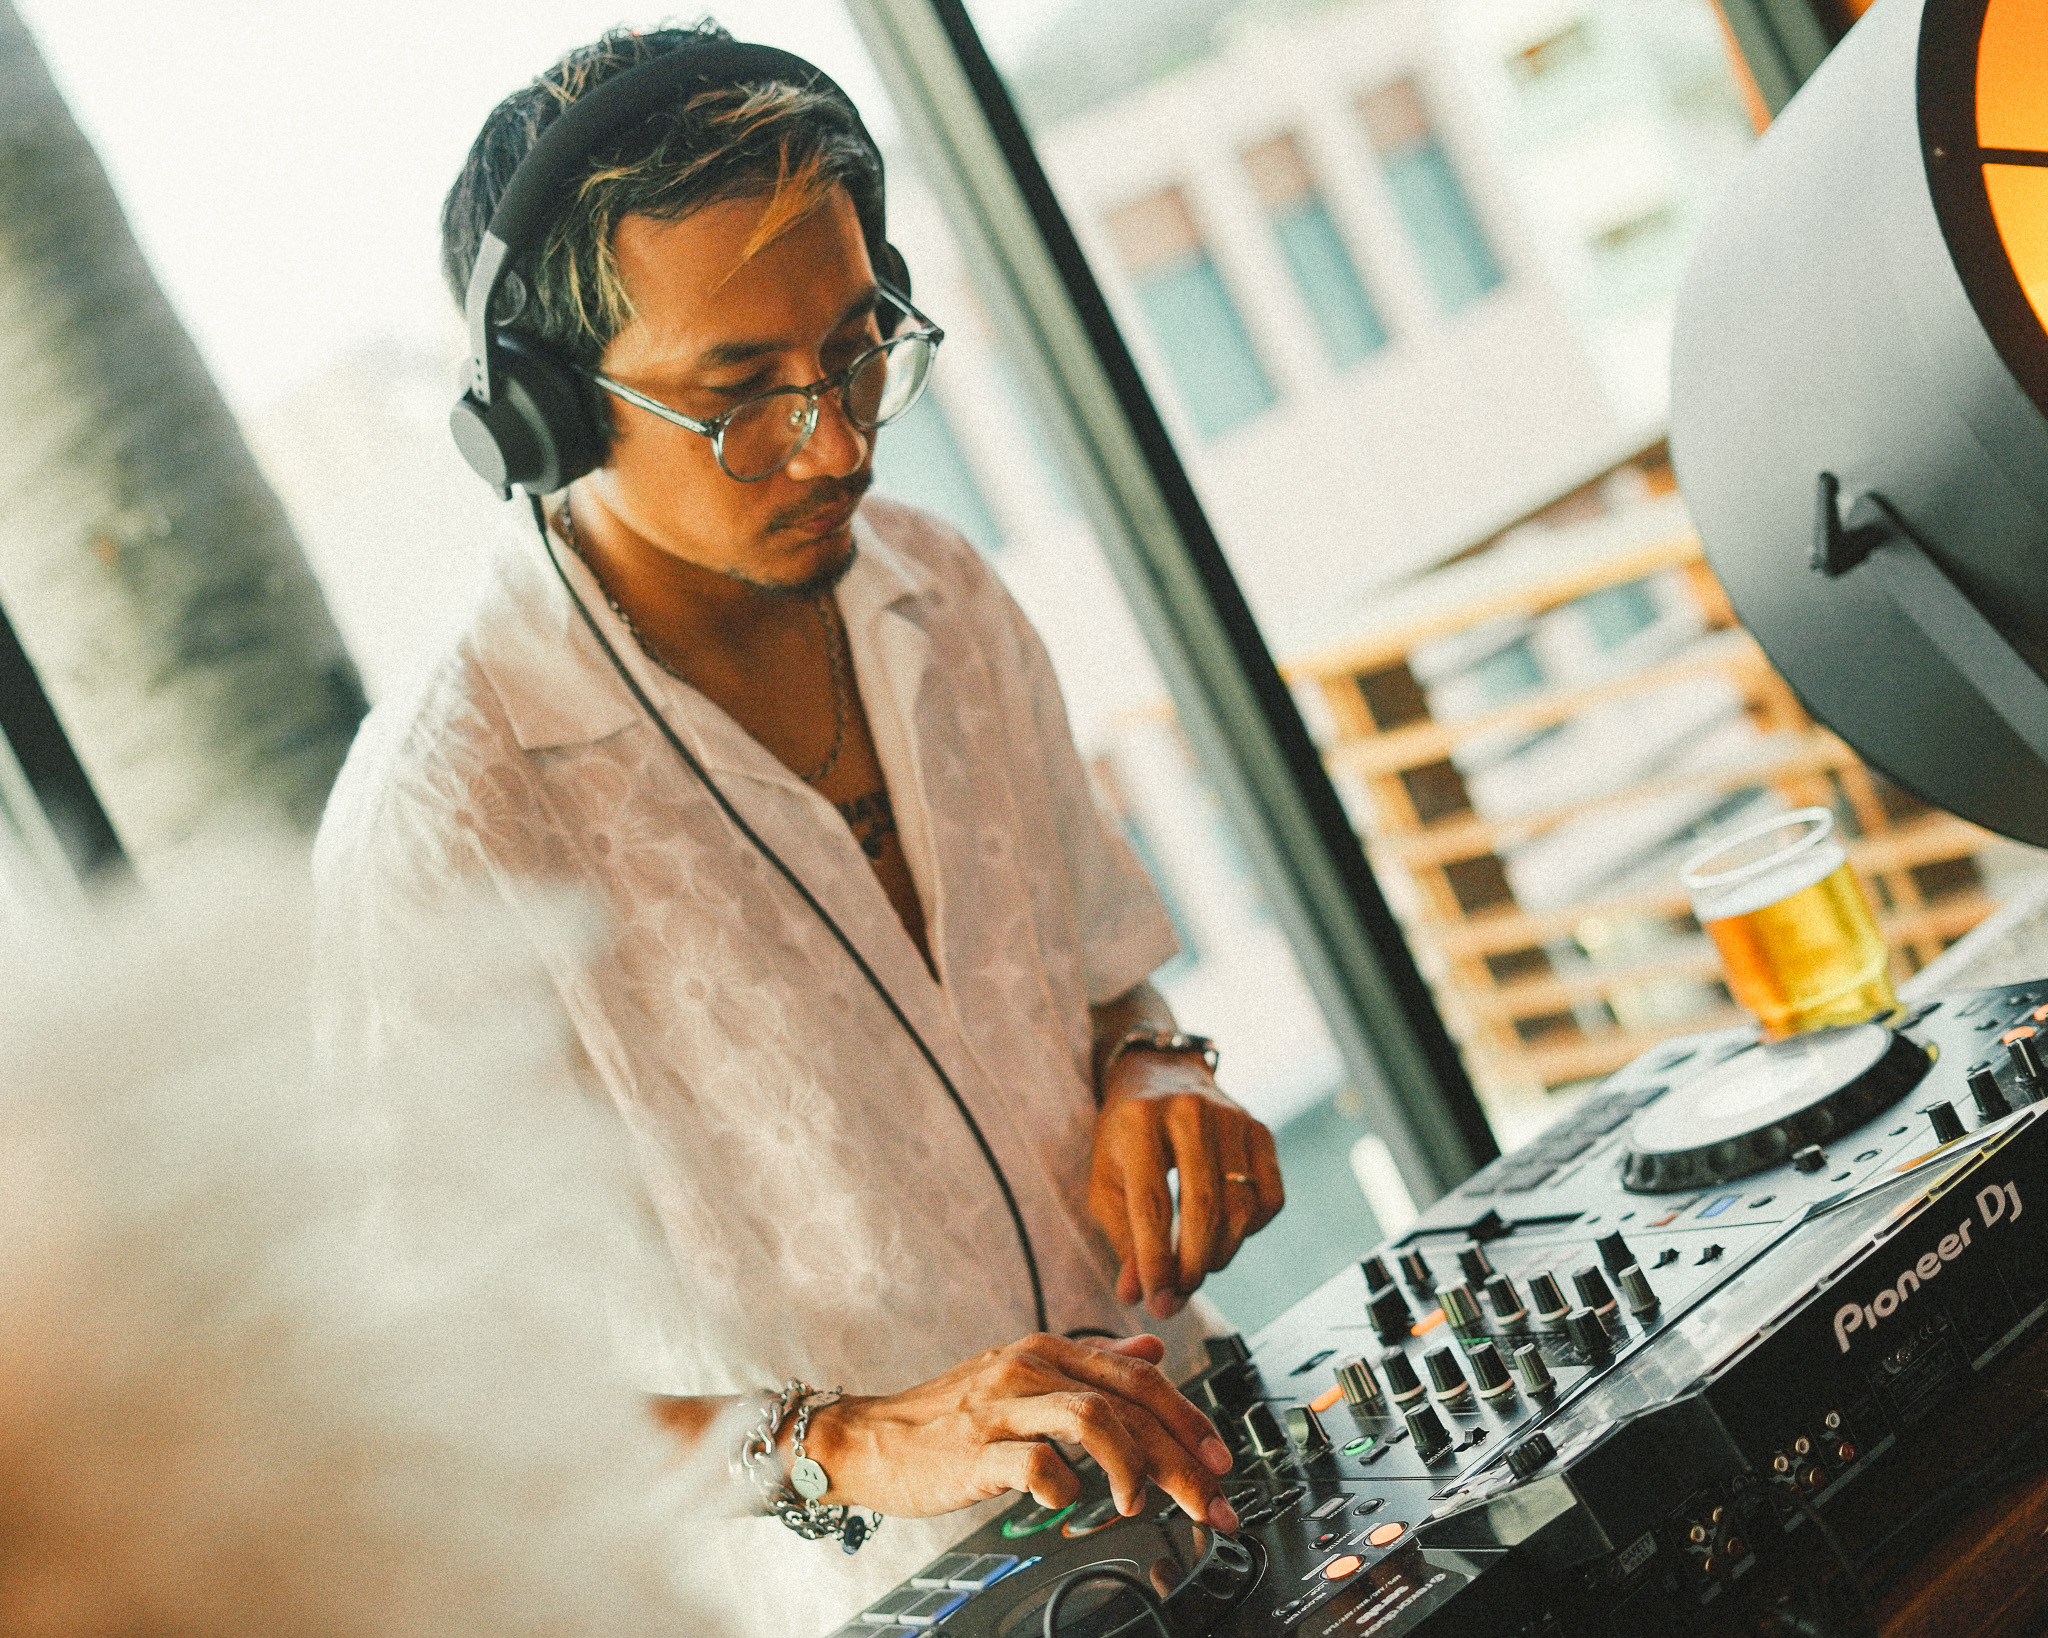 Nam Auun is a new DJ who has taken the House music world by storm with his unique style and eclectic mix of music.